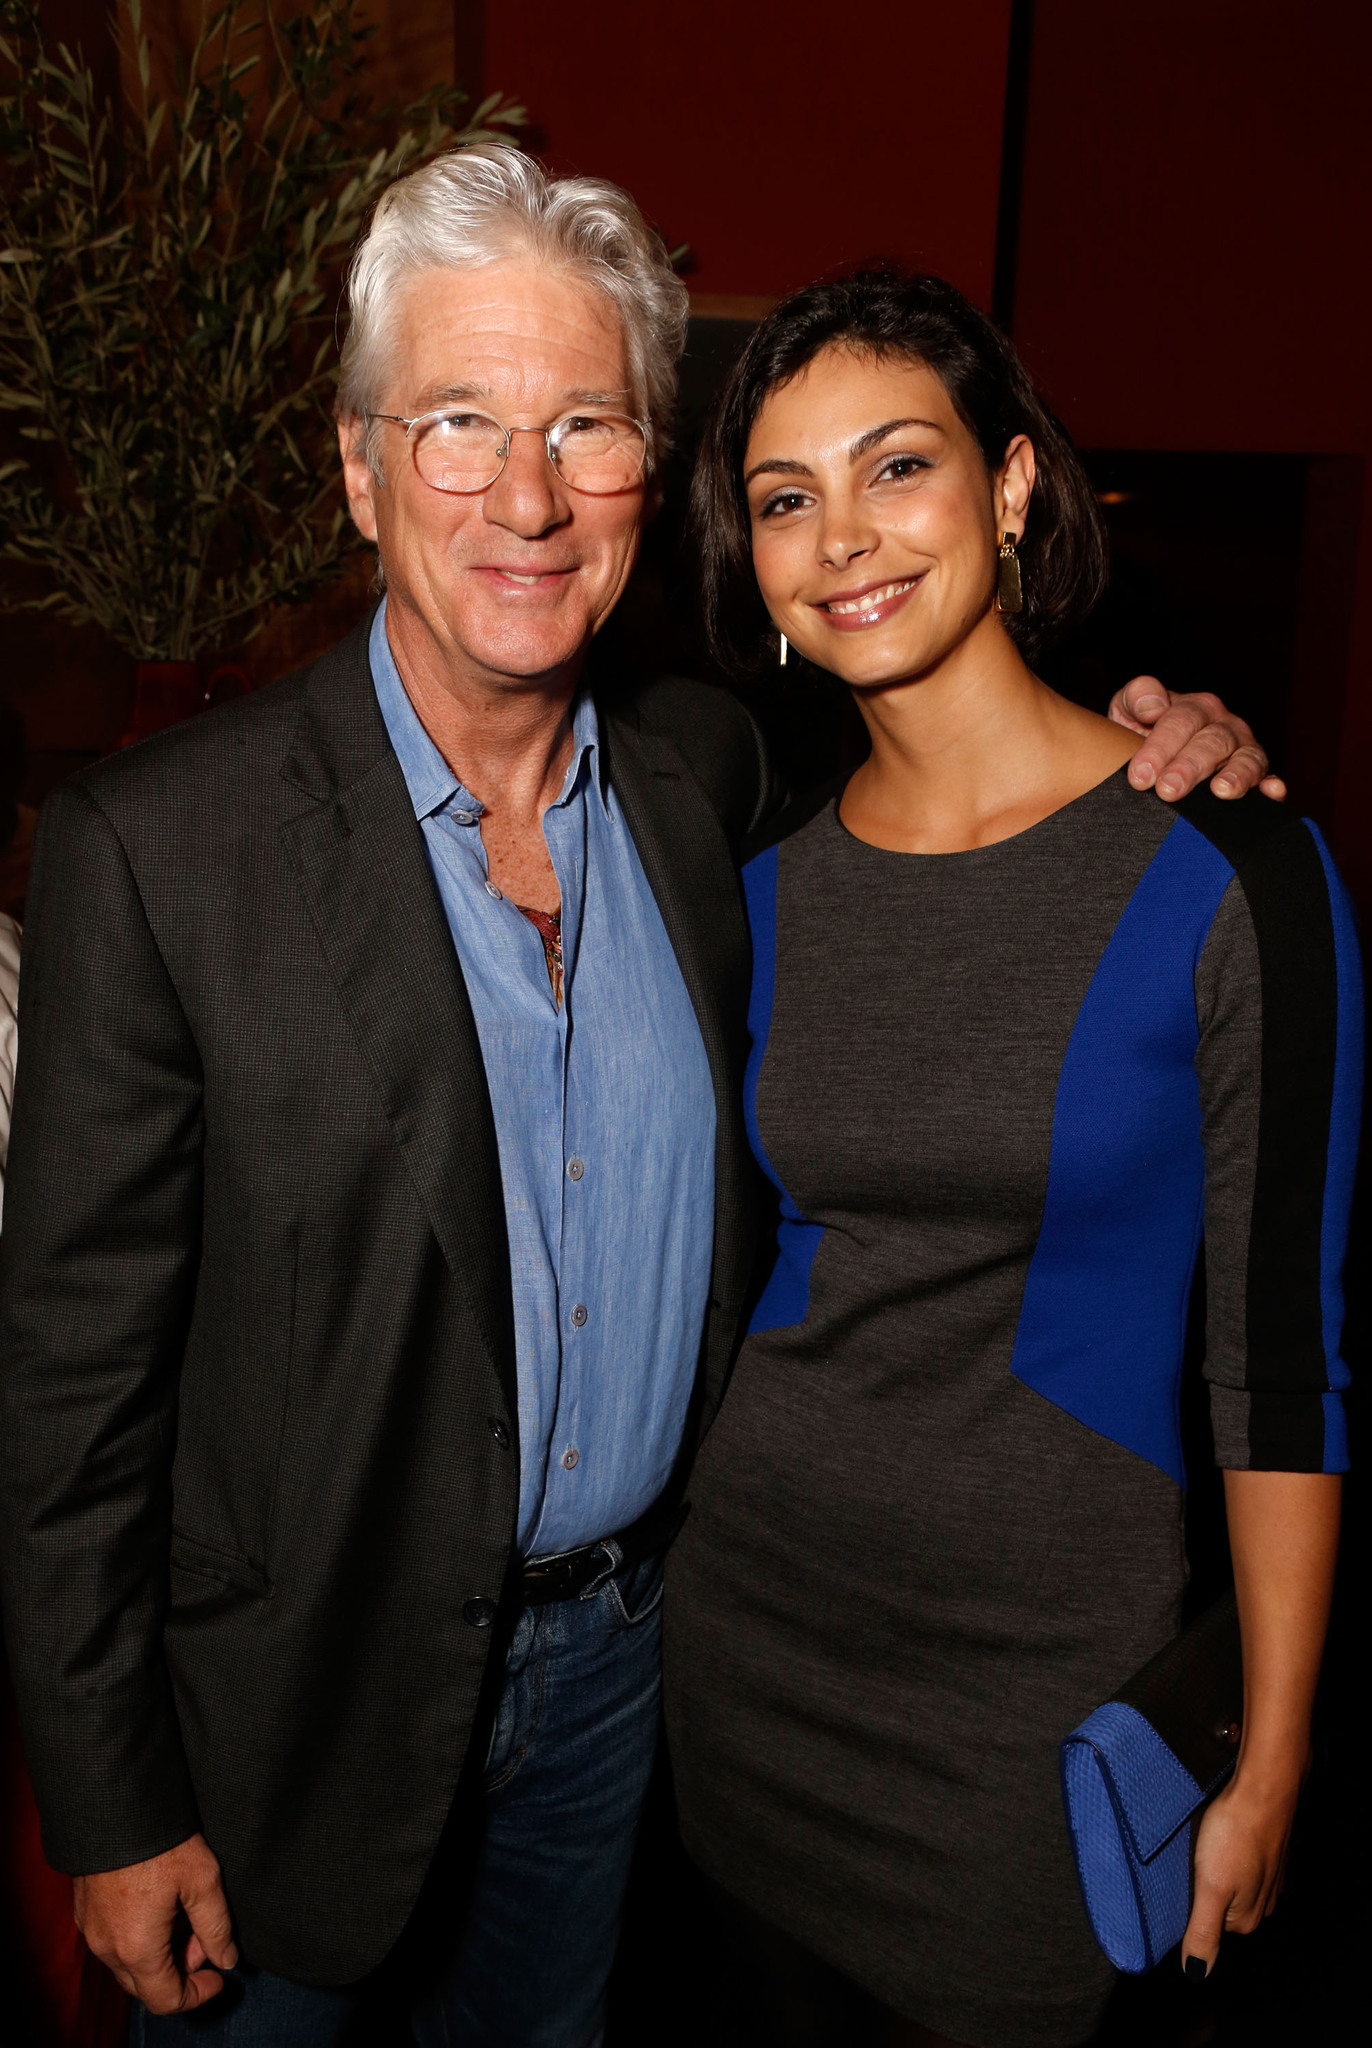 Richard Gere and Morena Baccarin at event of Apgaulinga aistra (2012)